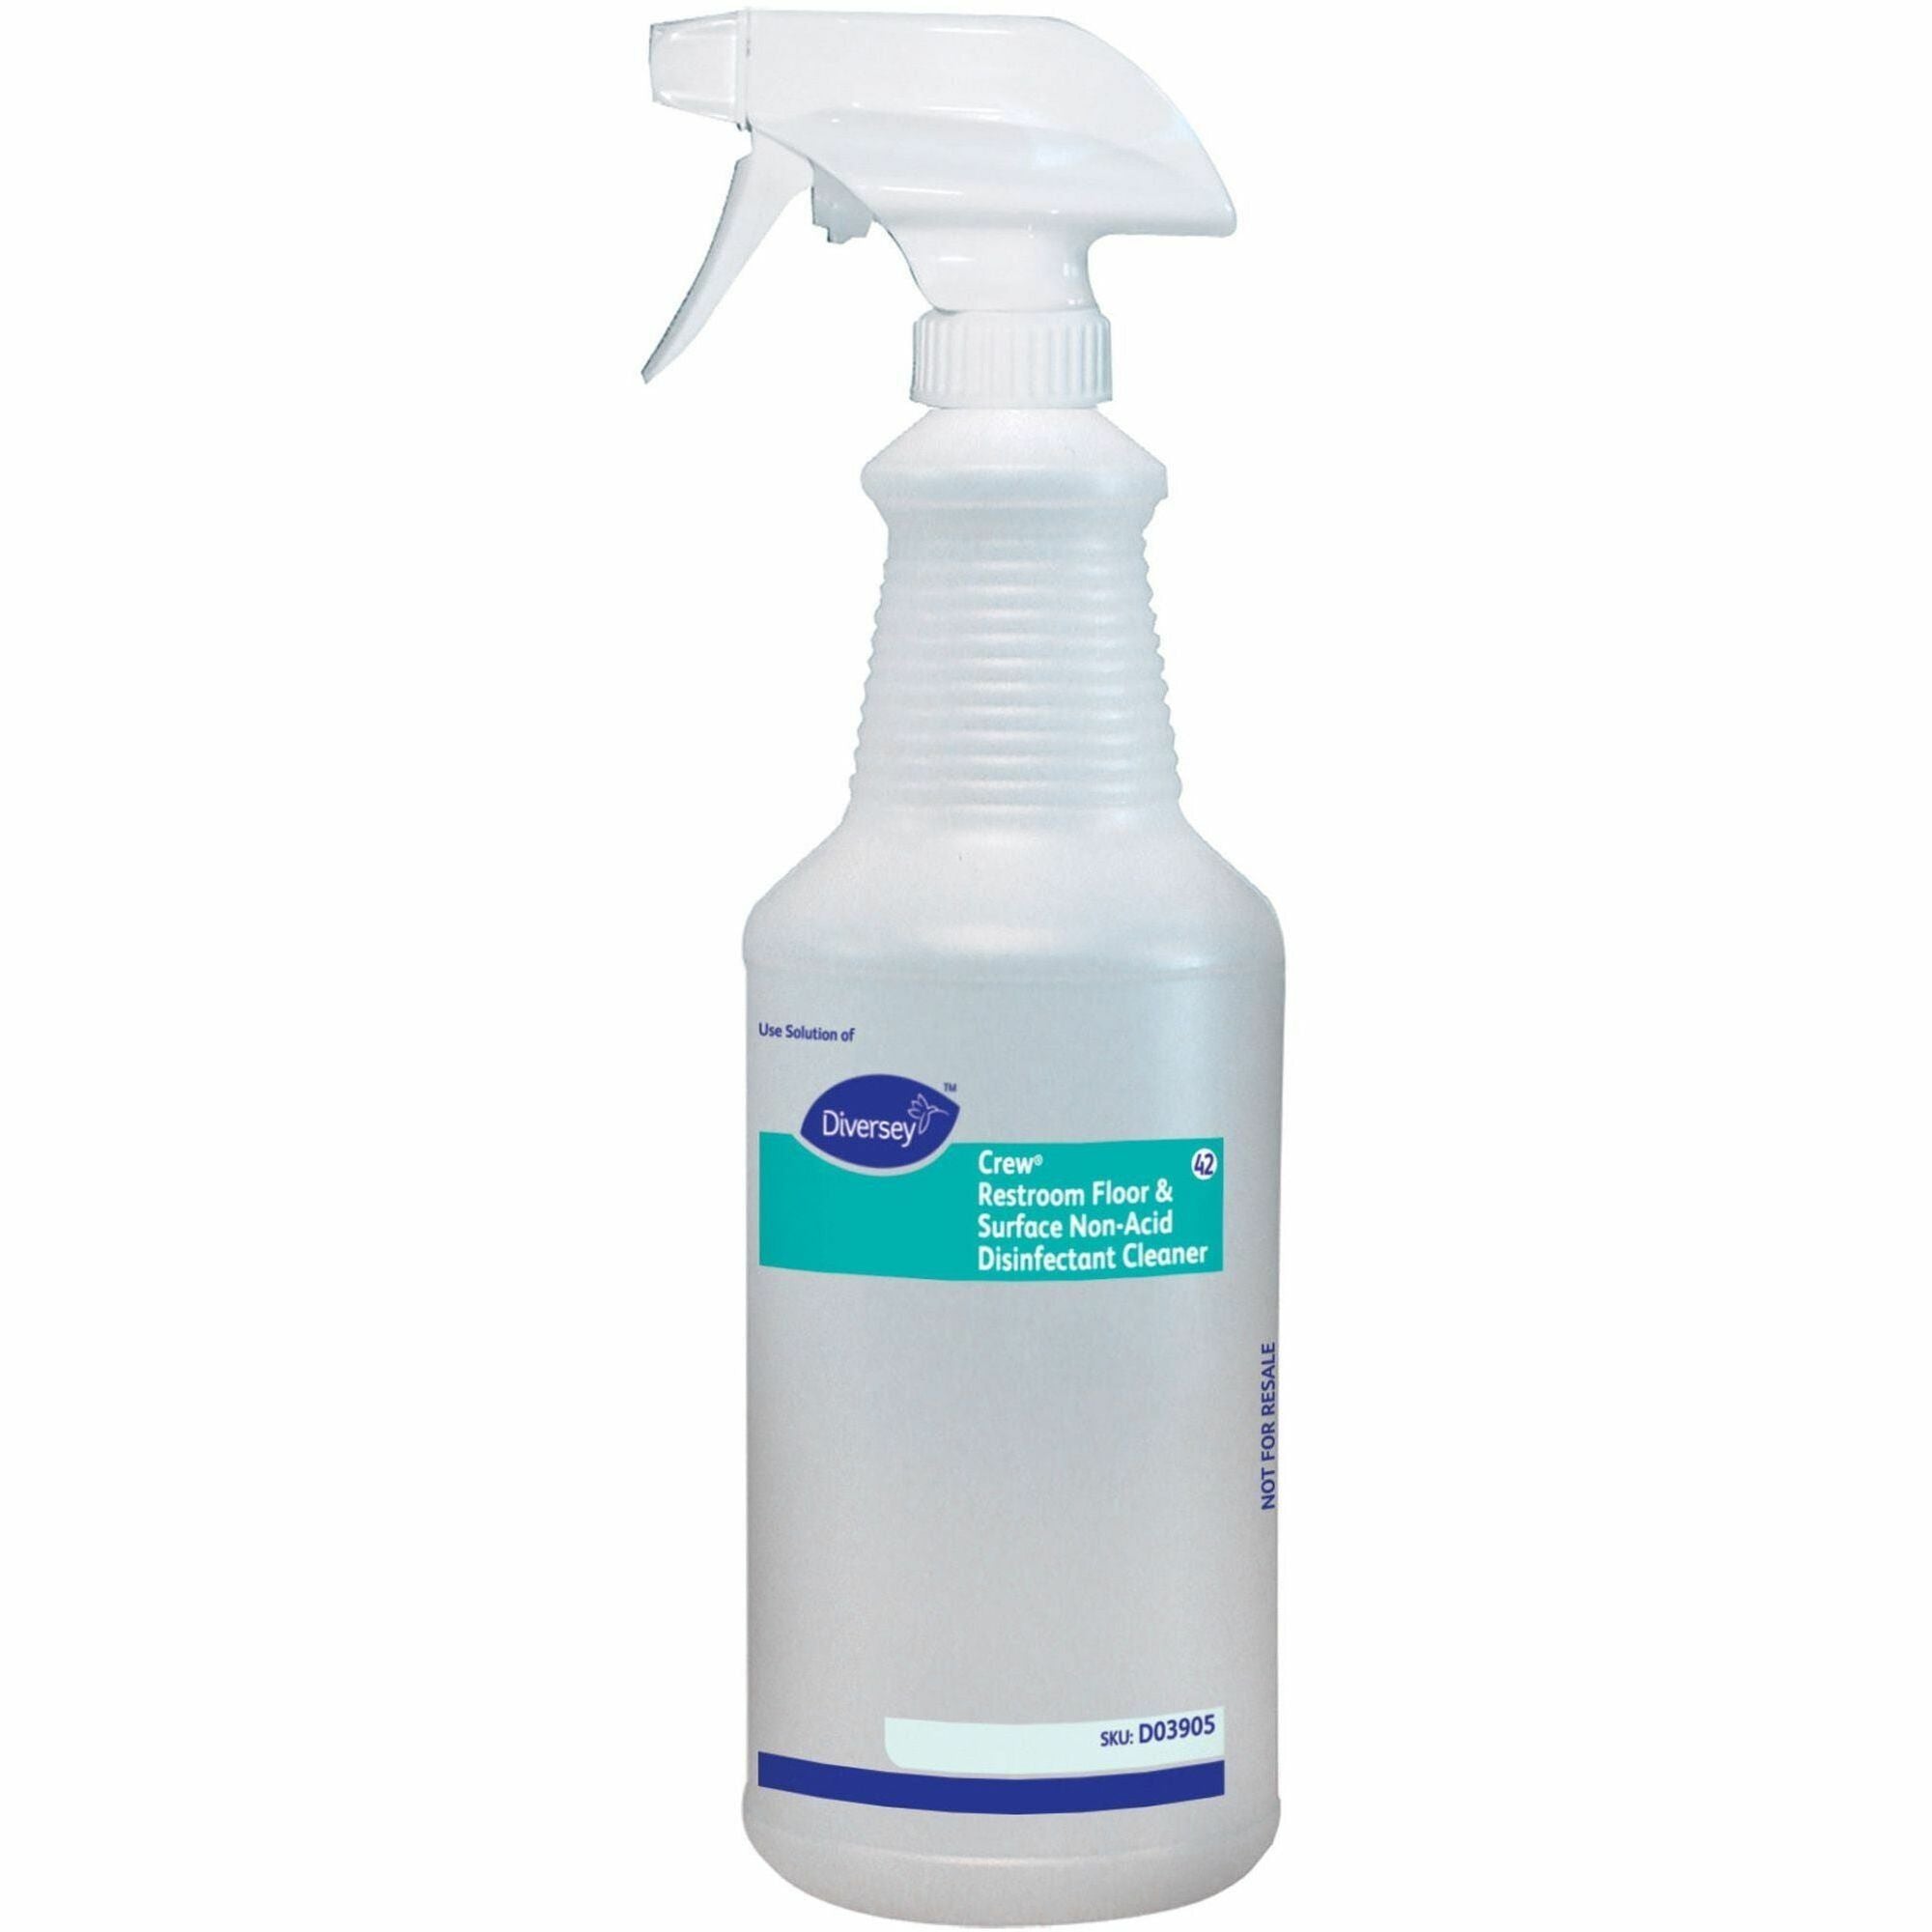 diversey-empty-spray-bottle-for-diversey-crew-restroom-disinfectant-cleaner-suitable-for-restroom-floor-easy-to-use-rinse-free-non-porous-washable-12-carton-white_dvod03905a - 1